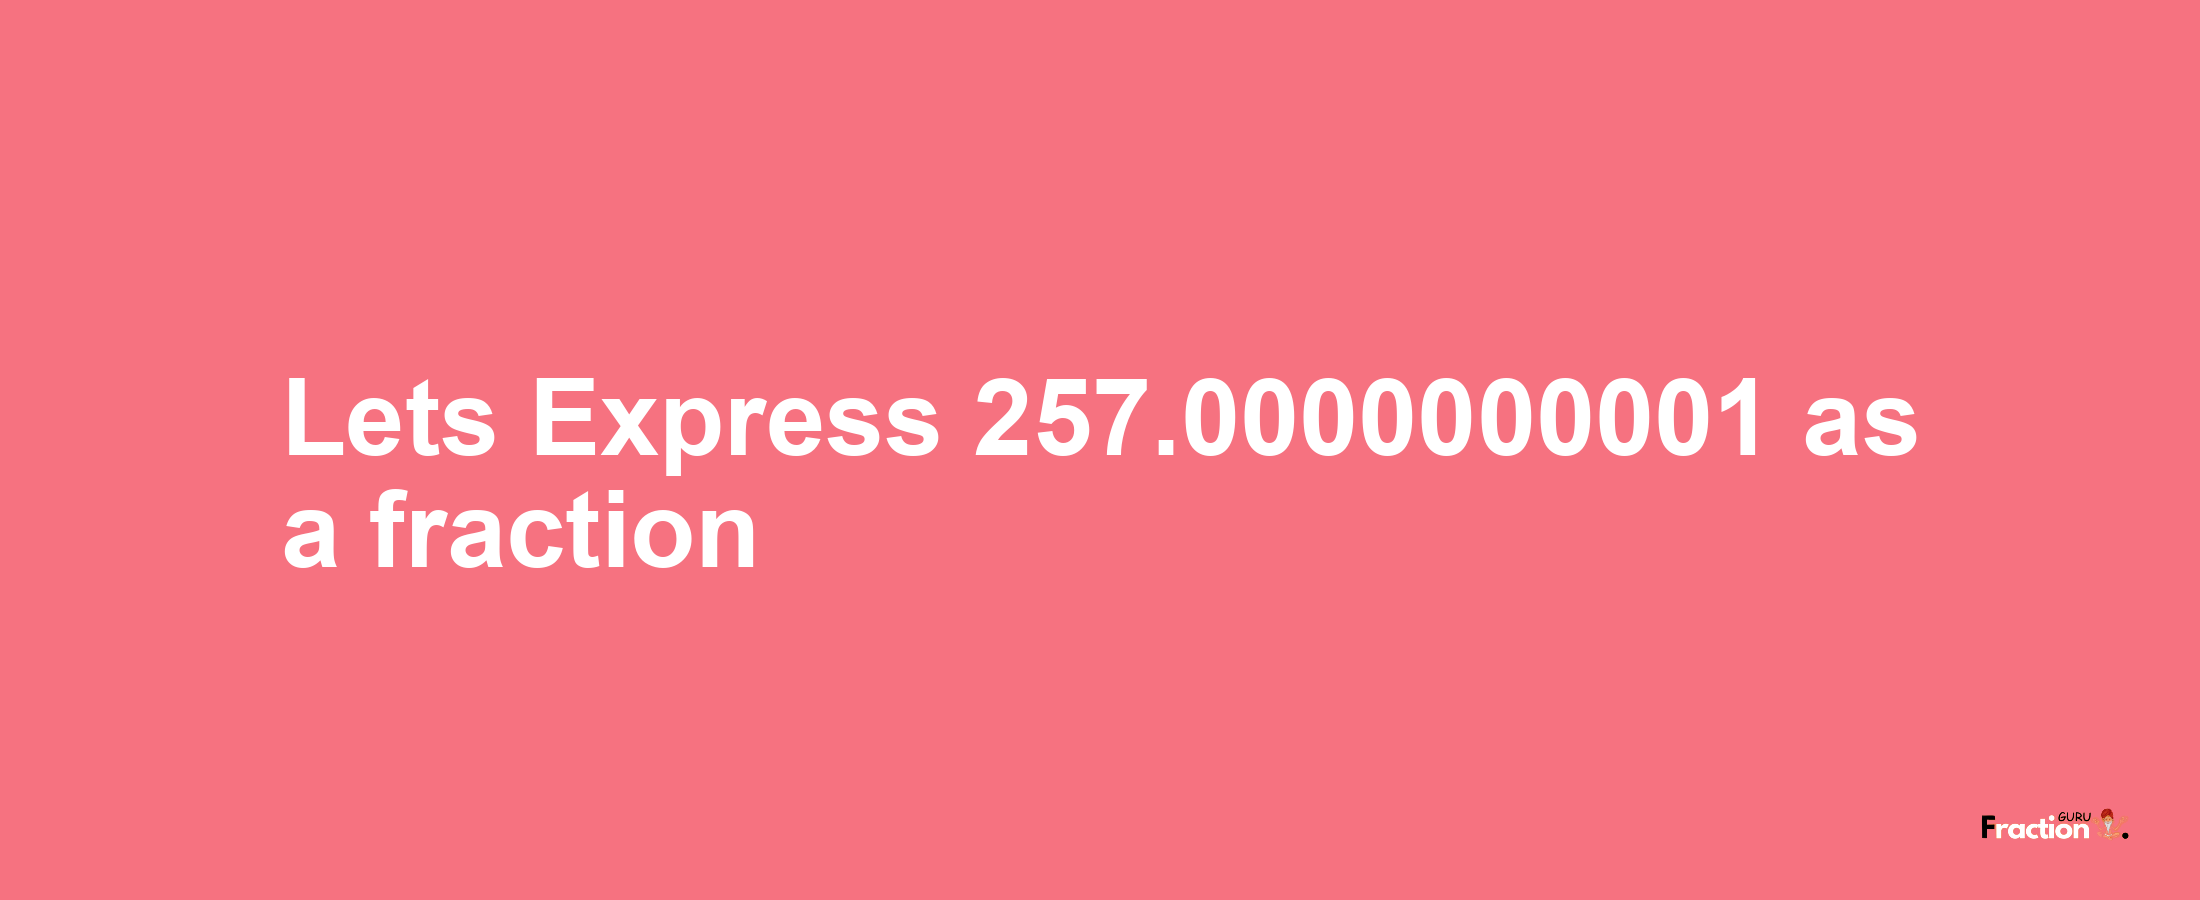 Lets Express 257.0000000001 as afraction